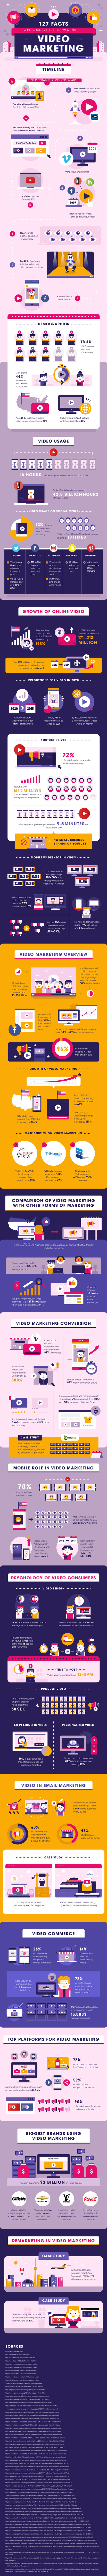 video marketing facts infographic